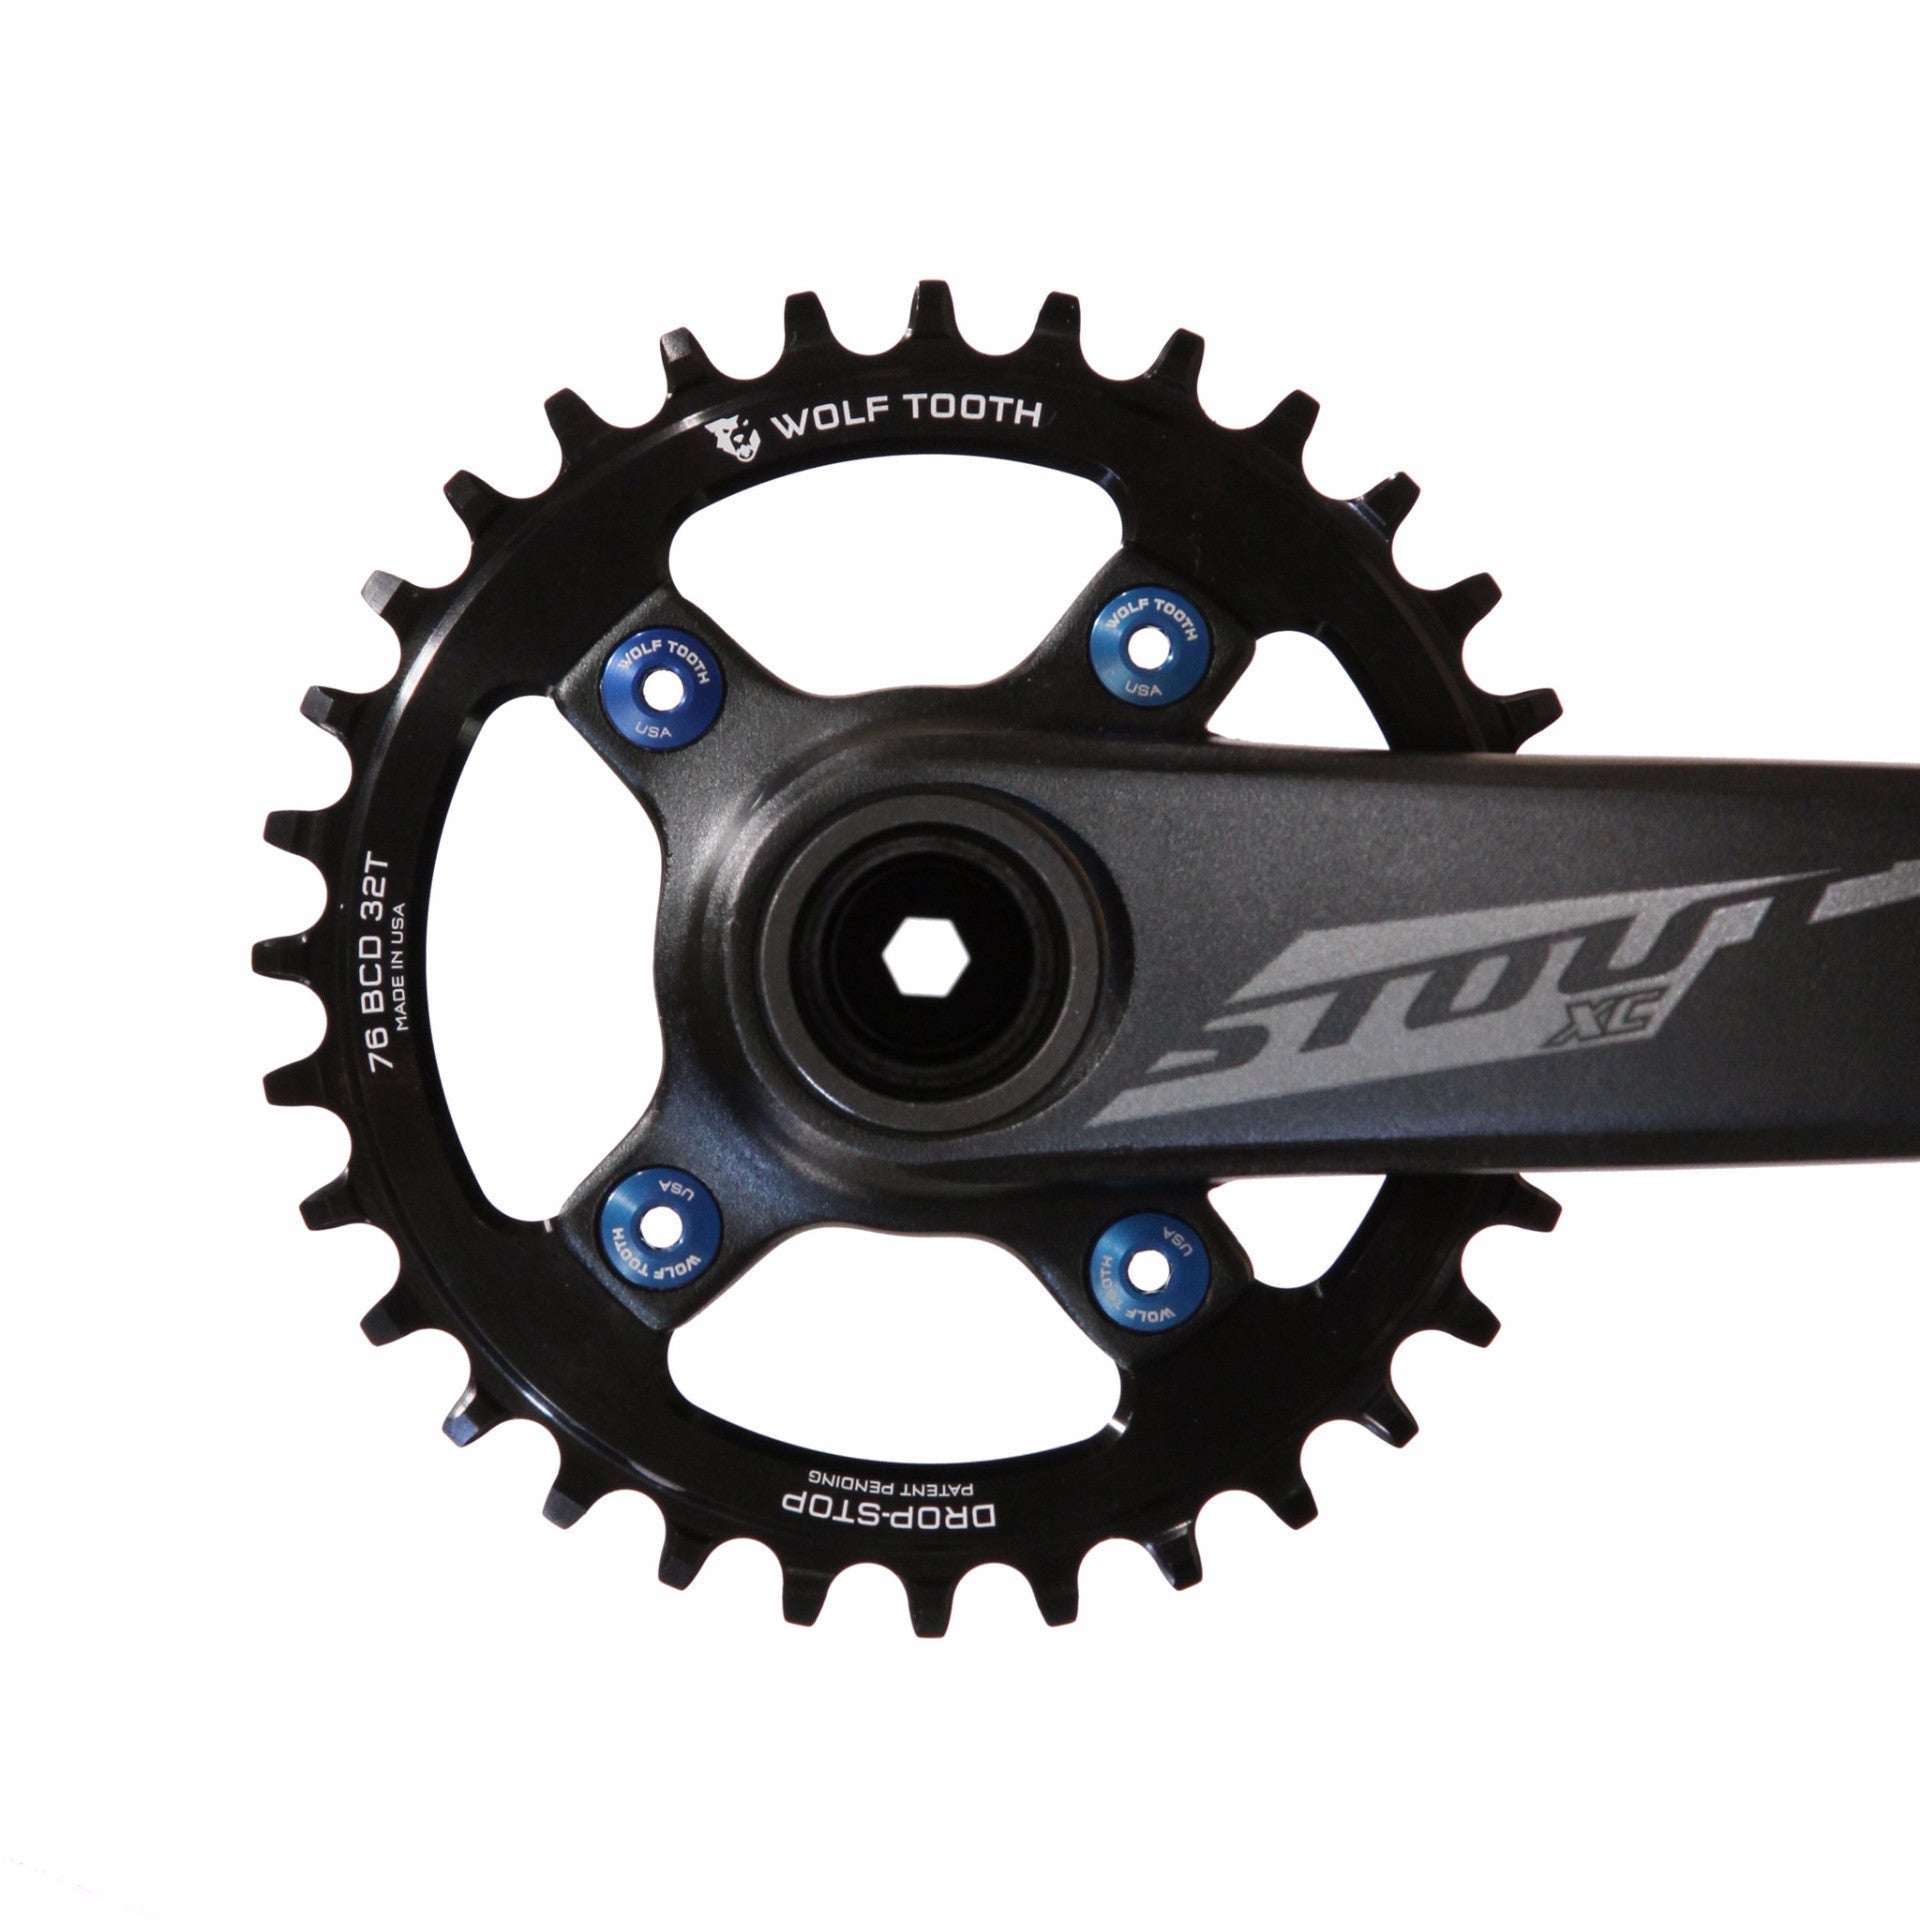 Wolf Tooth Components 76 BCD Chainrings for SRAM XX1 and